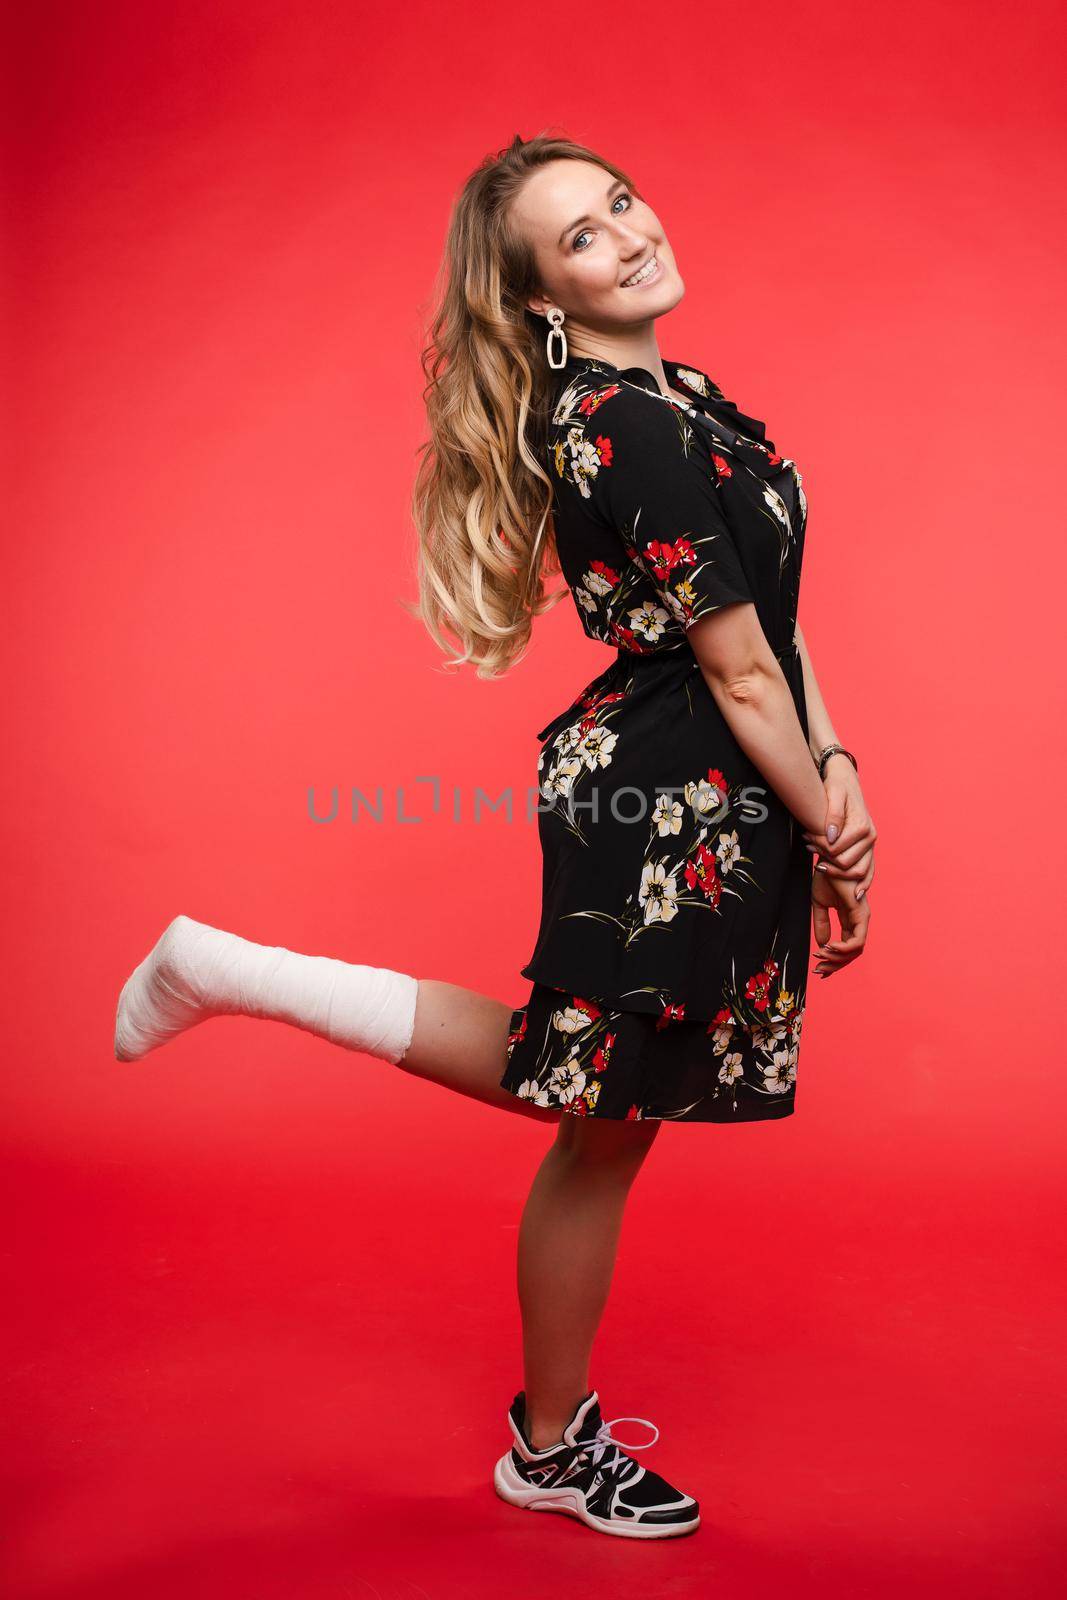 Full length studio shot of beautiful young woman with wavy hair wearing elegant flowered dress and sneaker with broken right left leg in plaster. Isolate on red background.